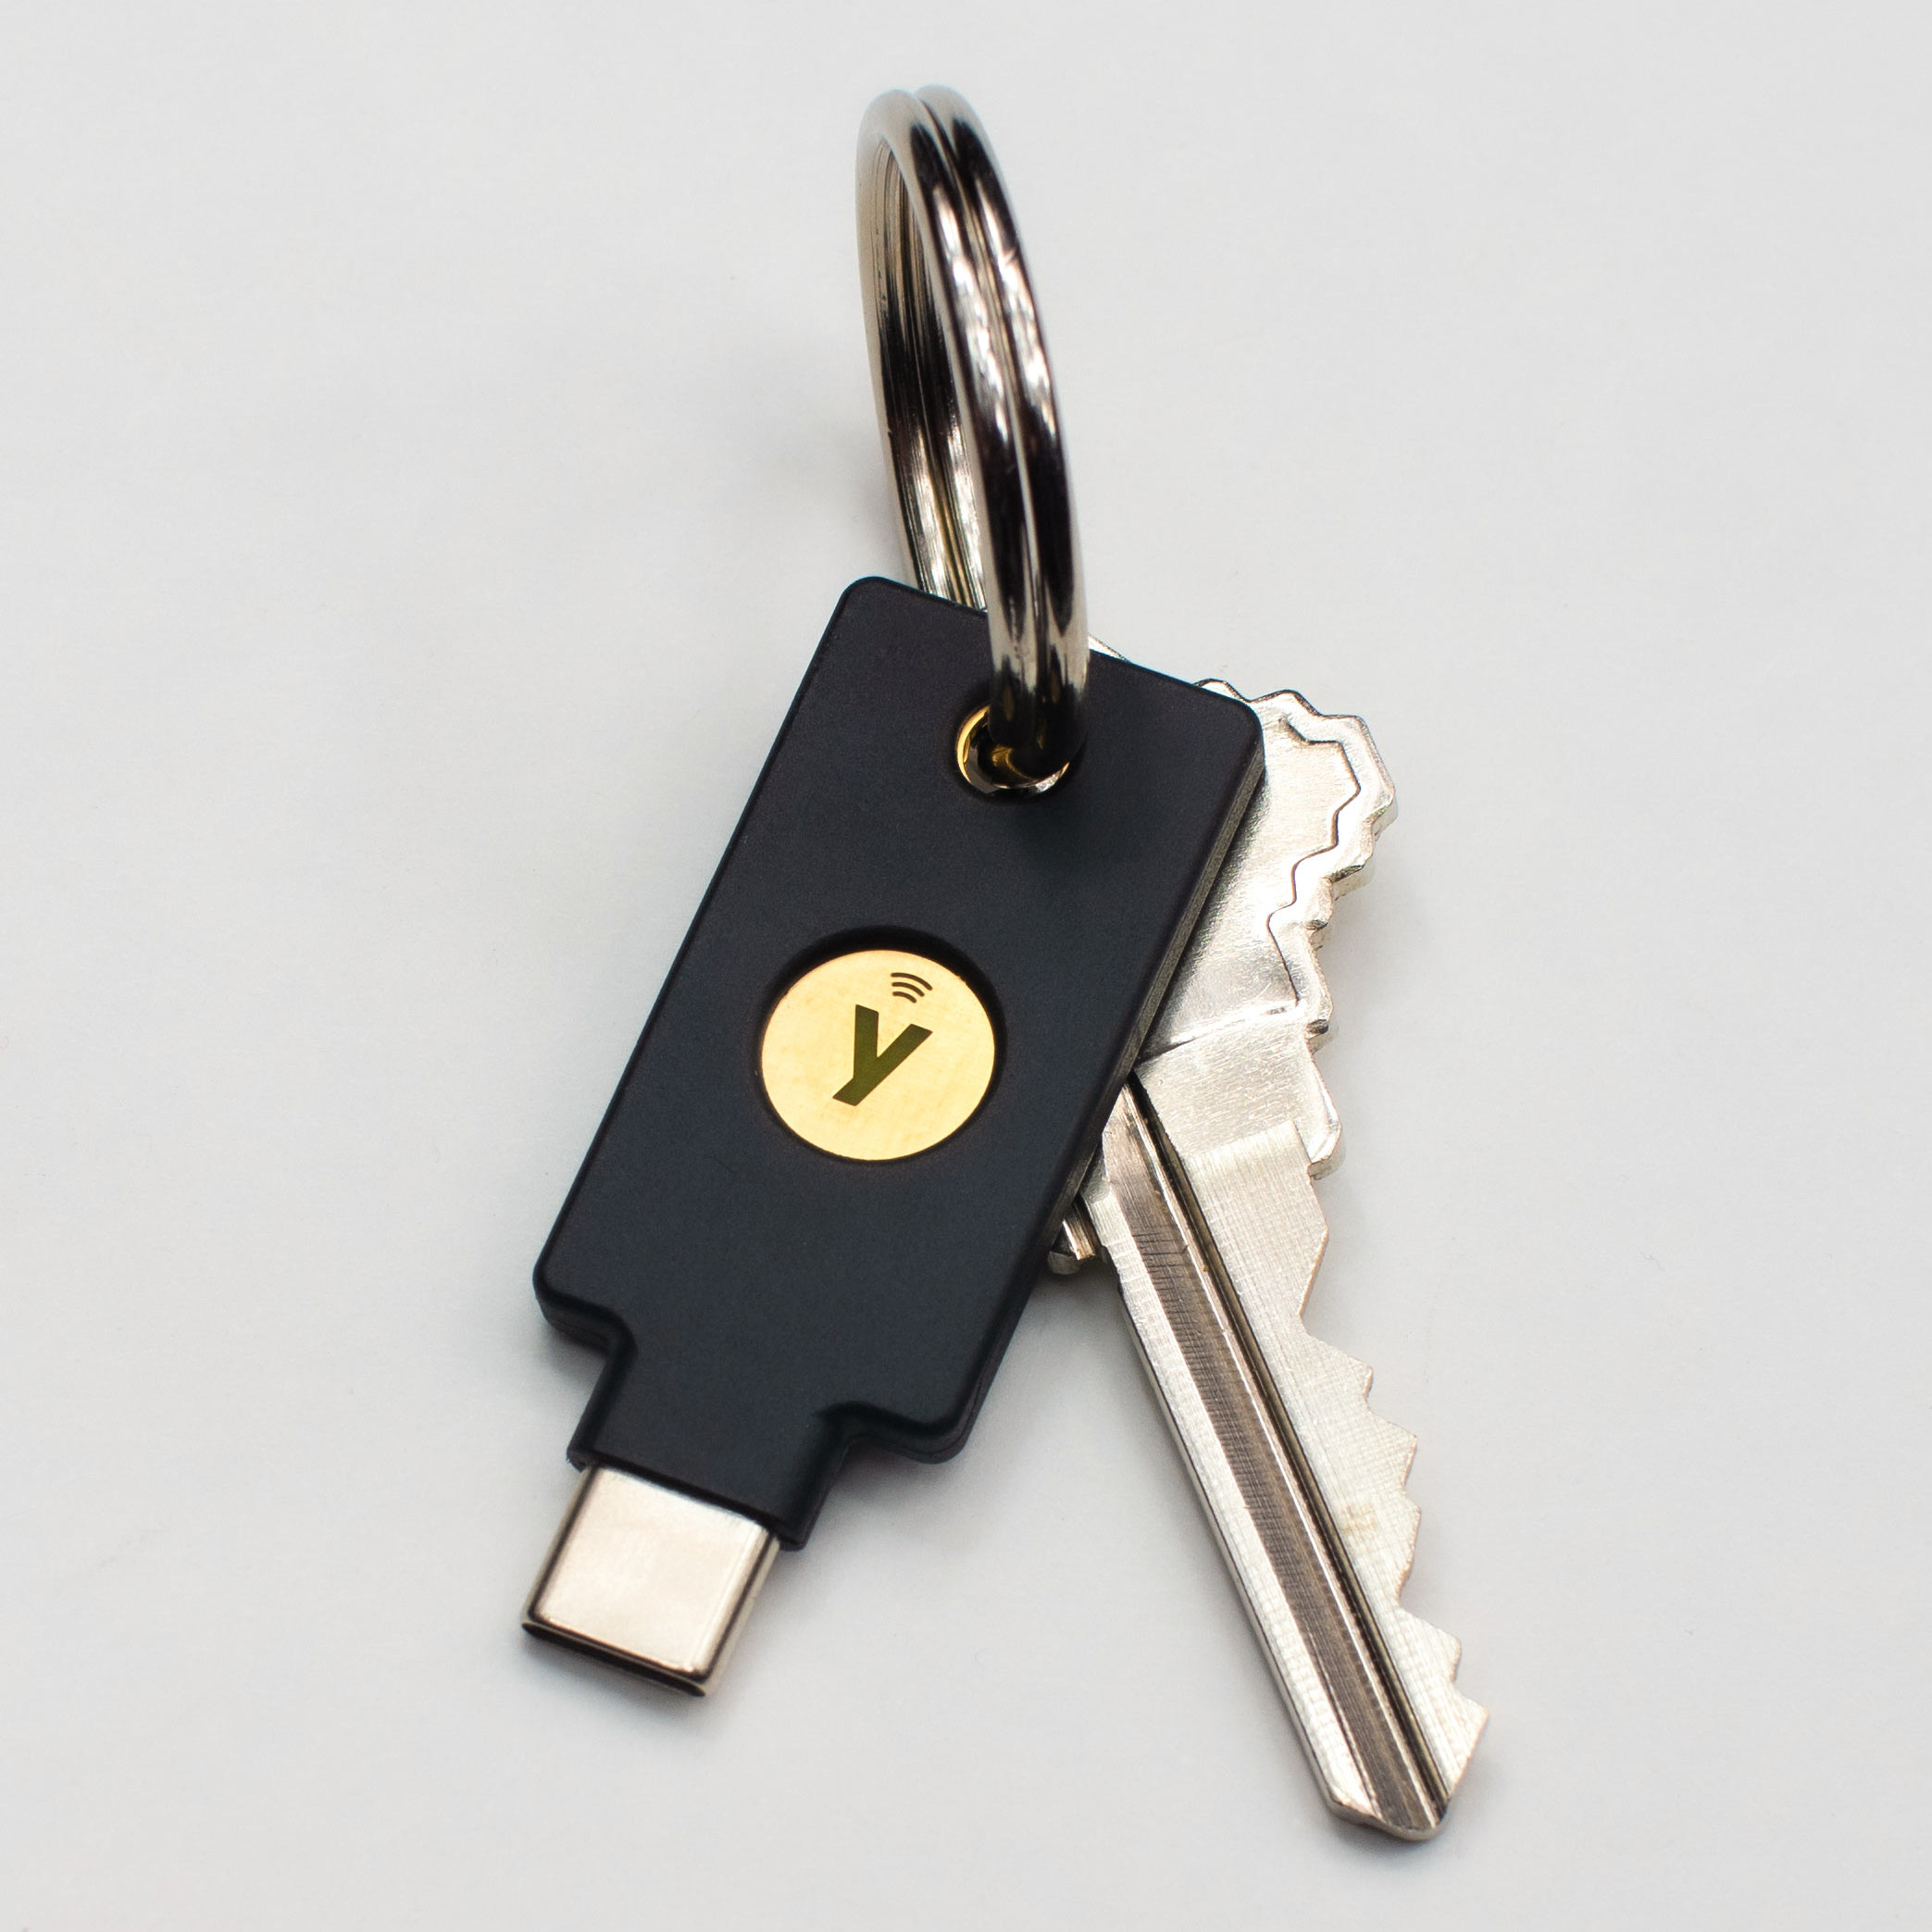 yubikey android nfc